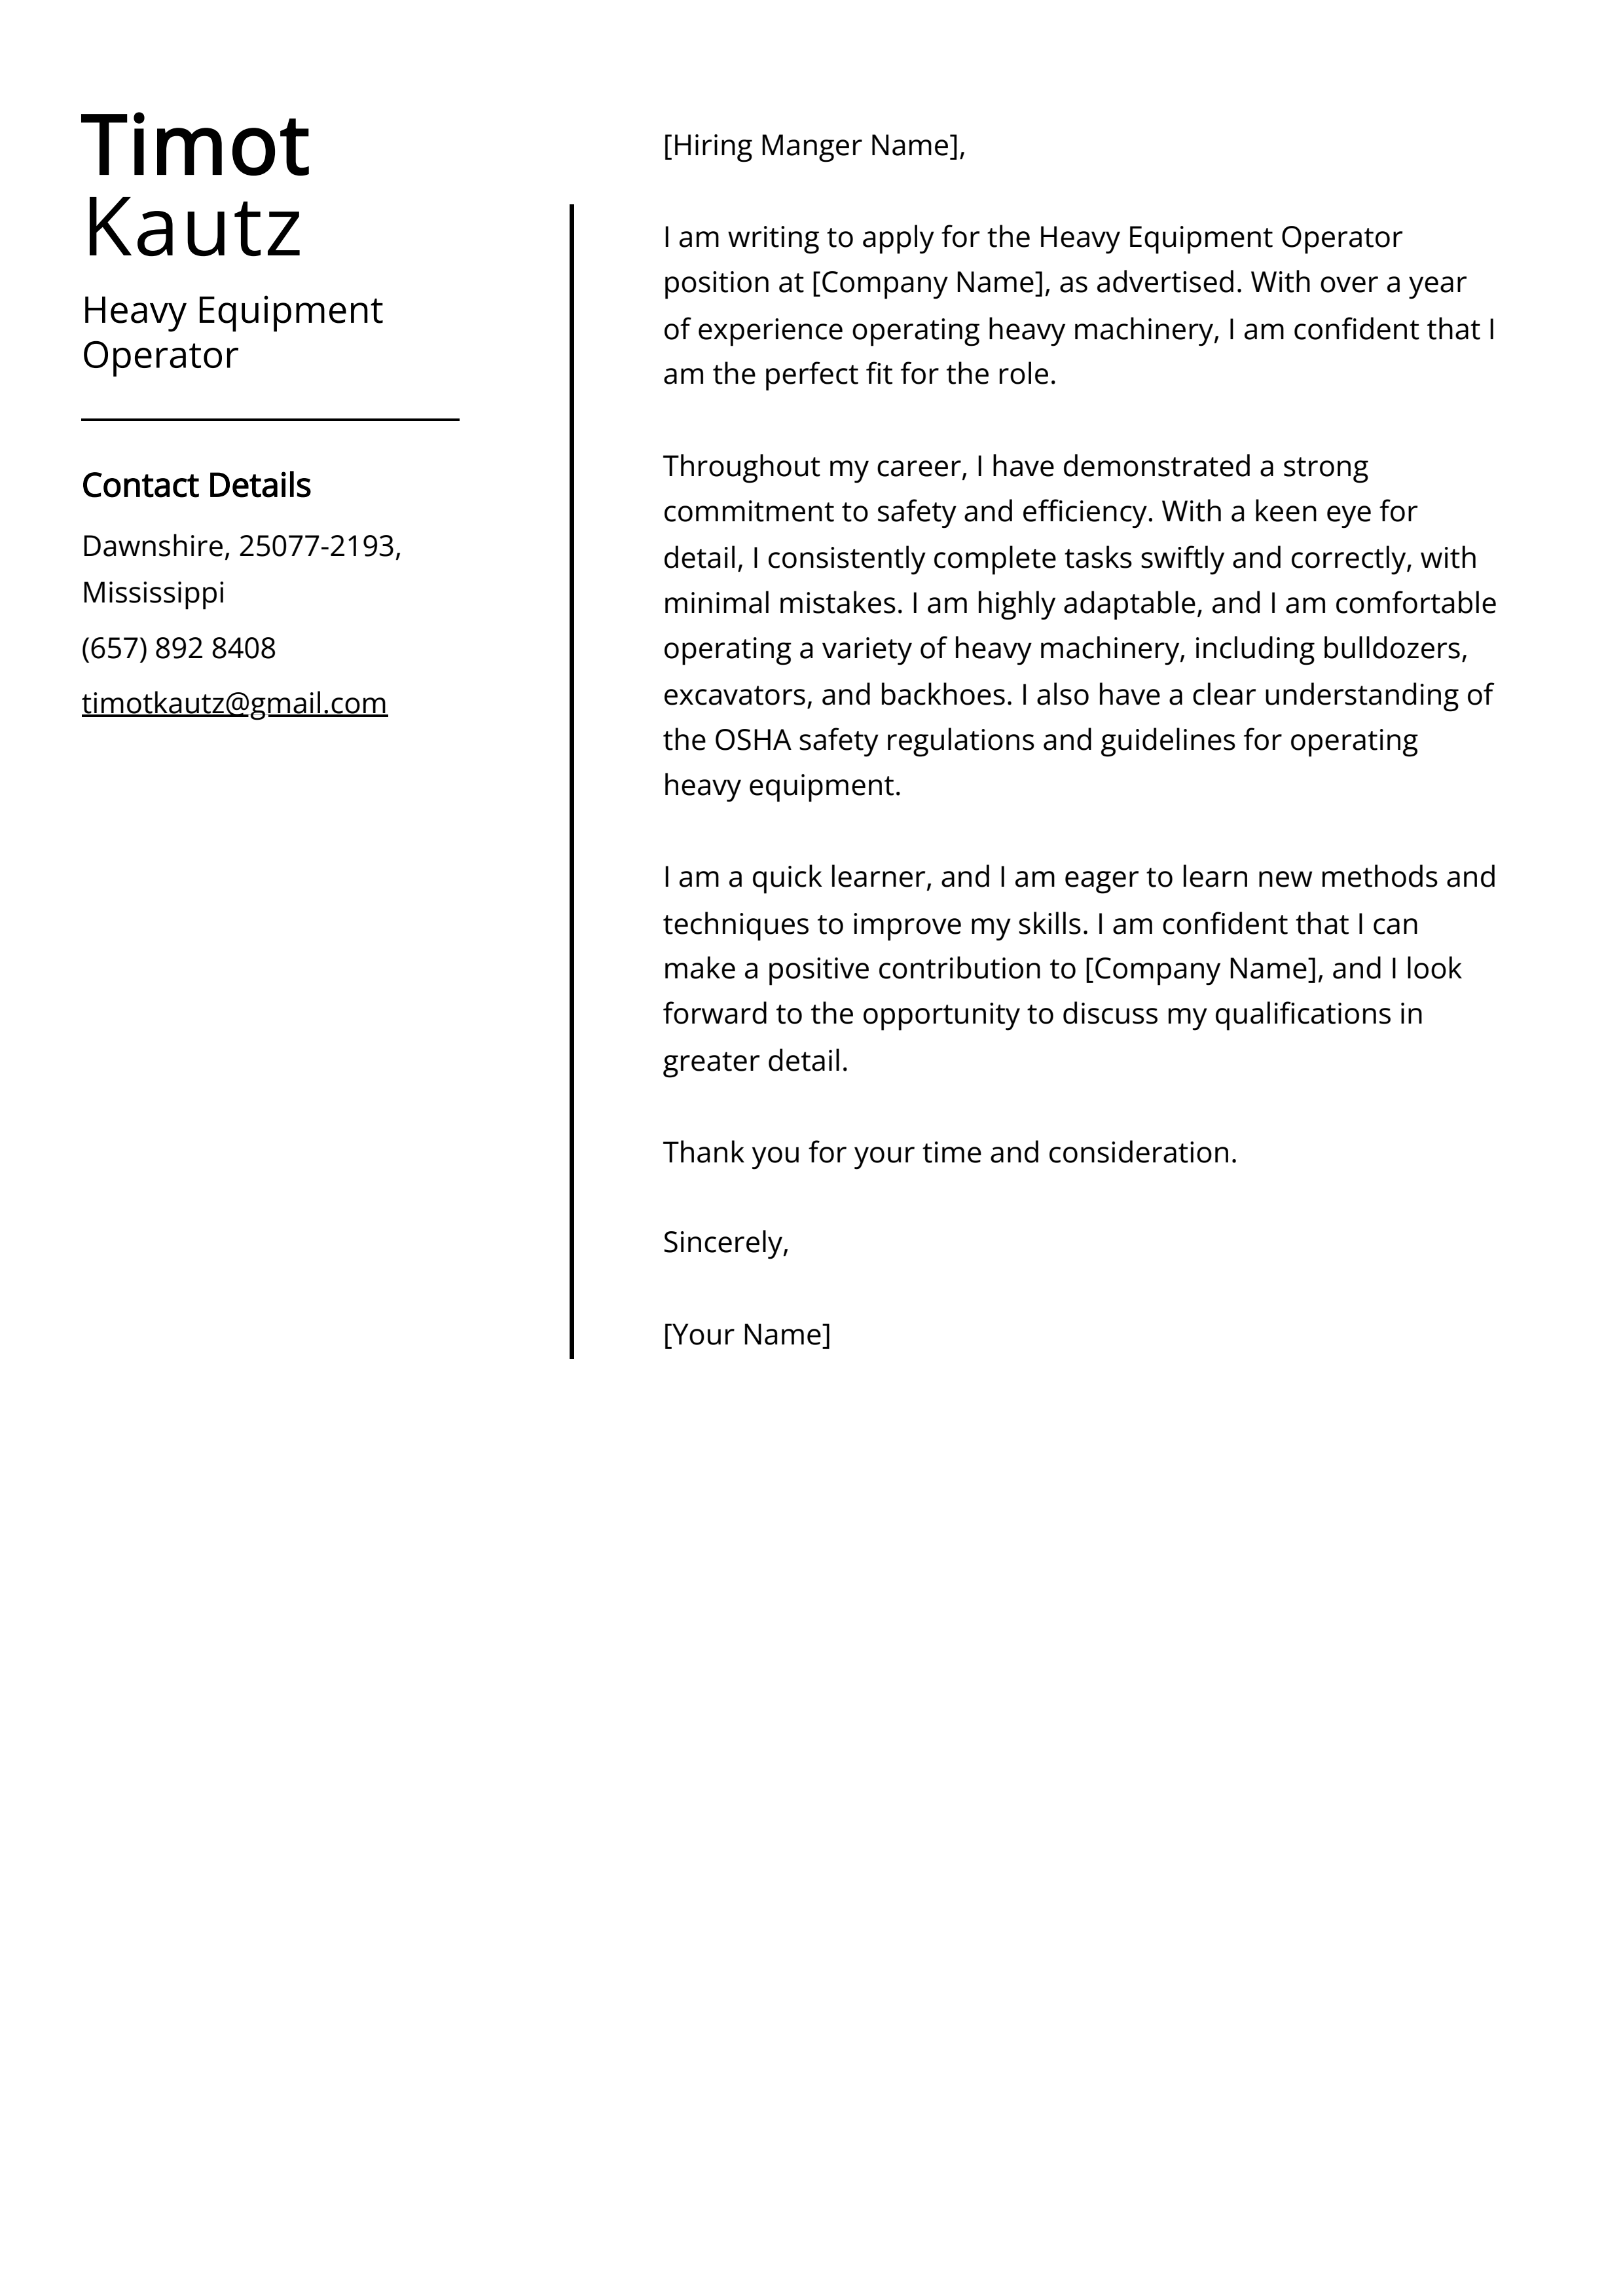 Heavy Equipment Operator Cover Letter Example